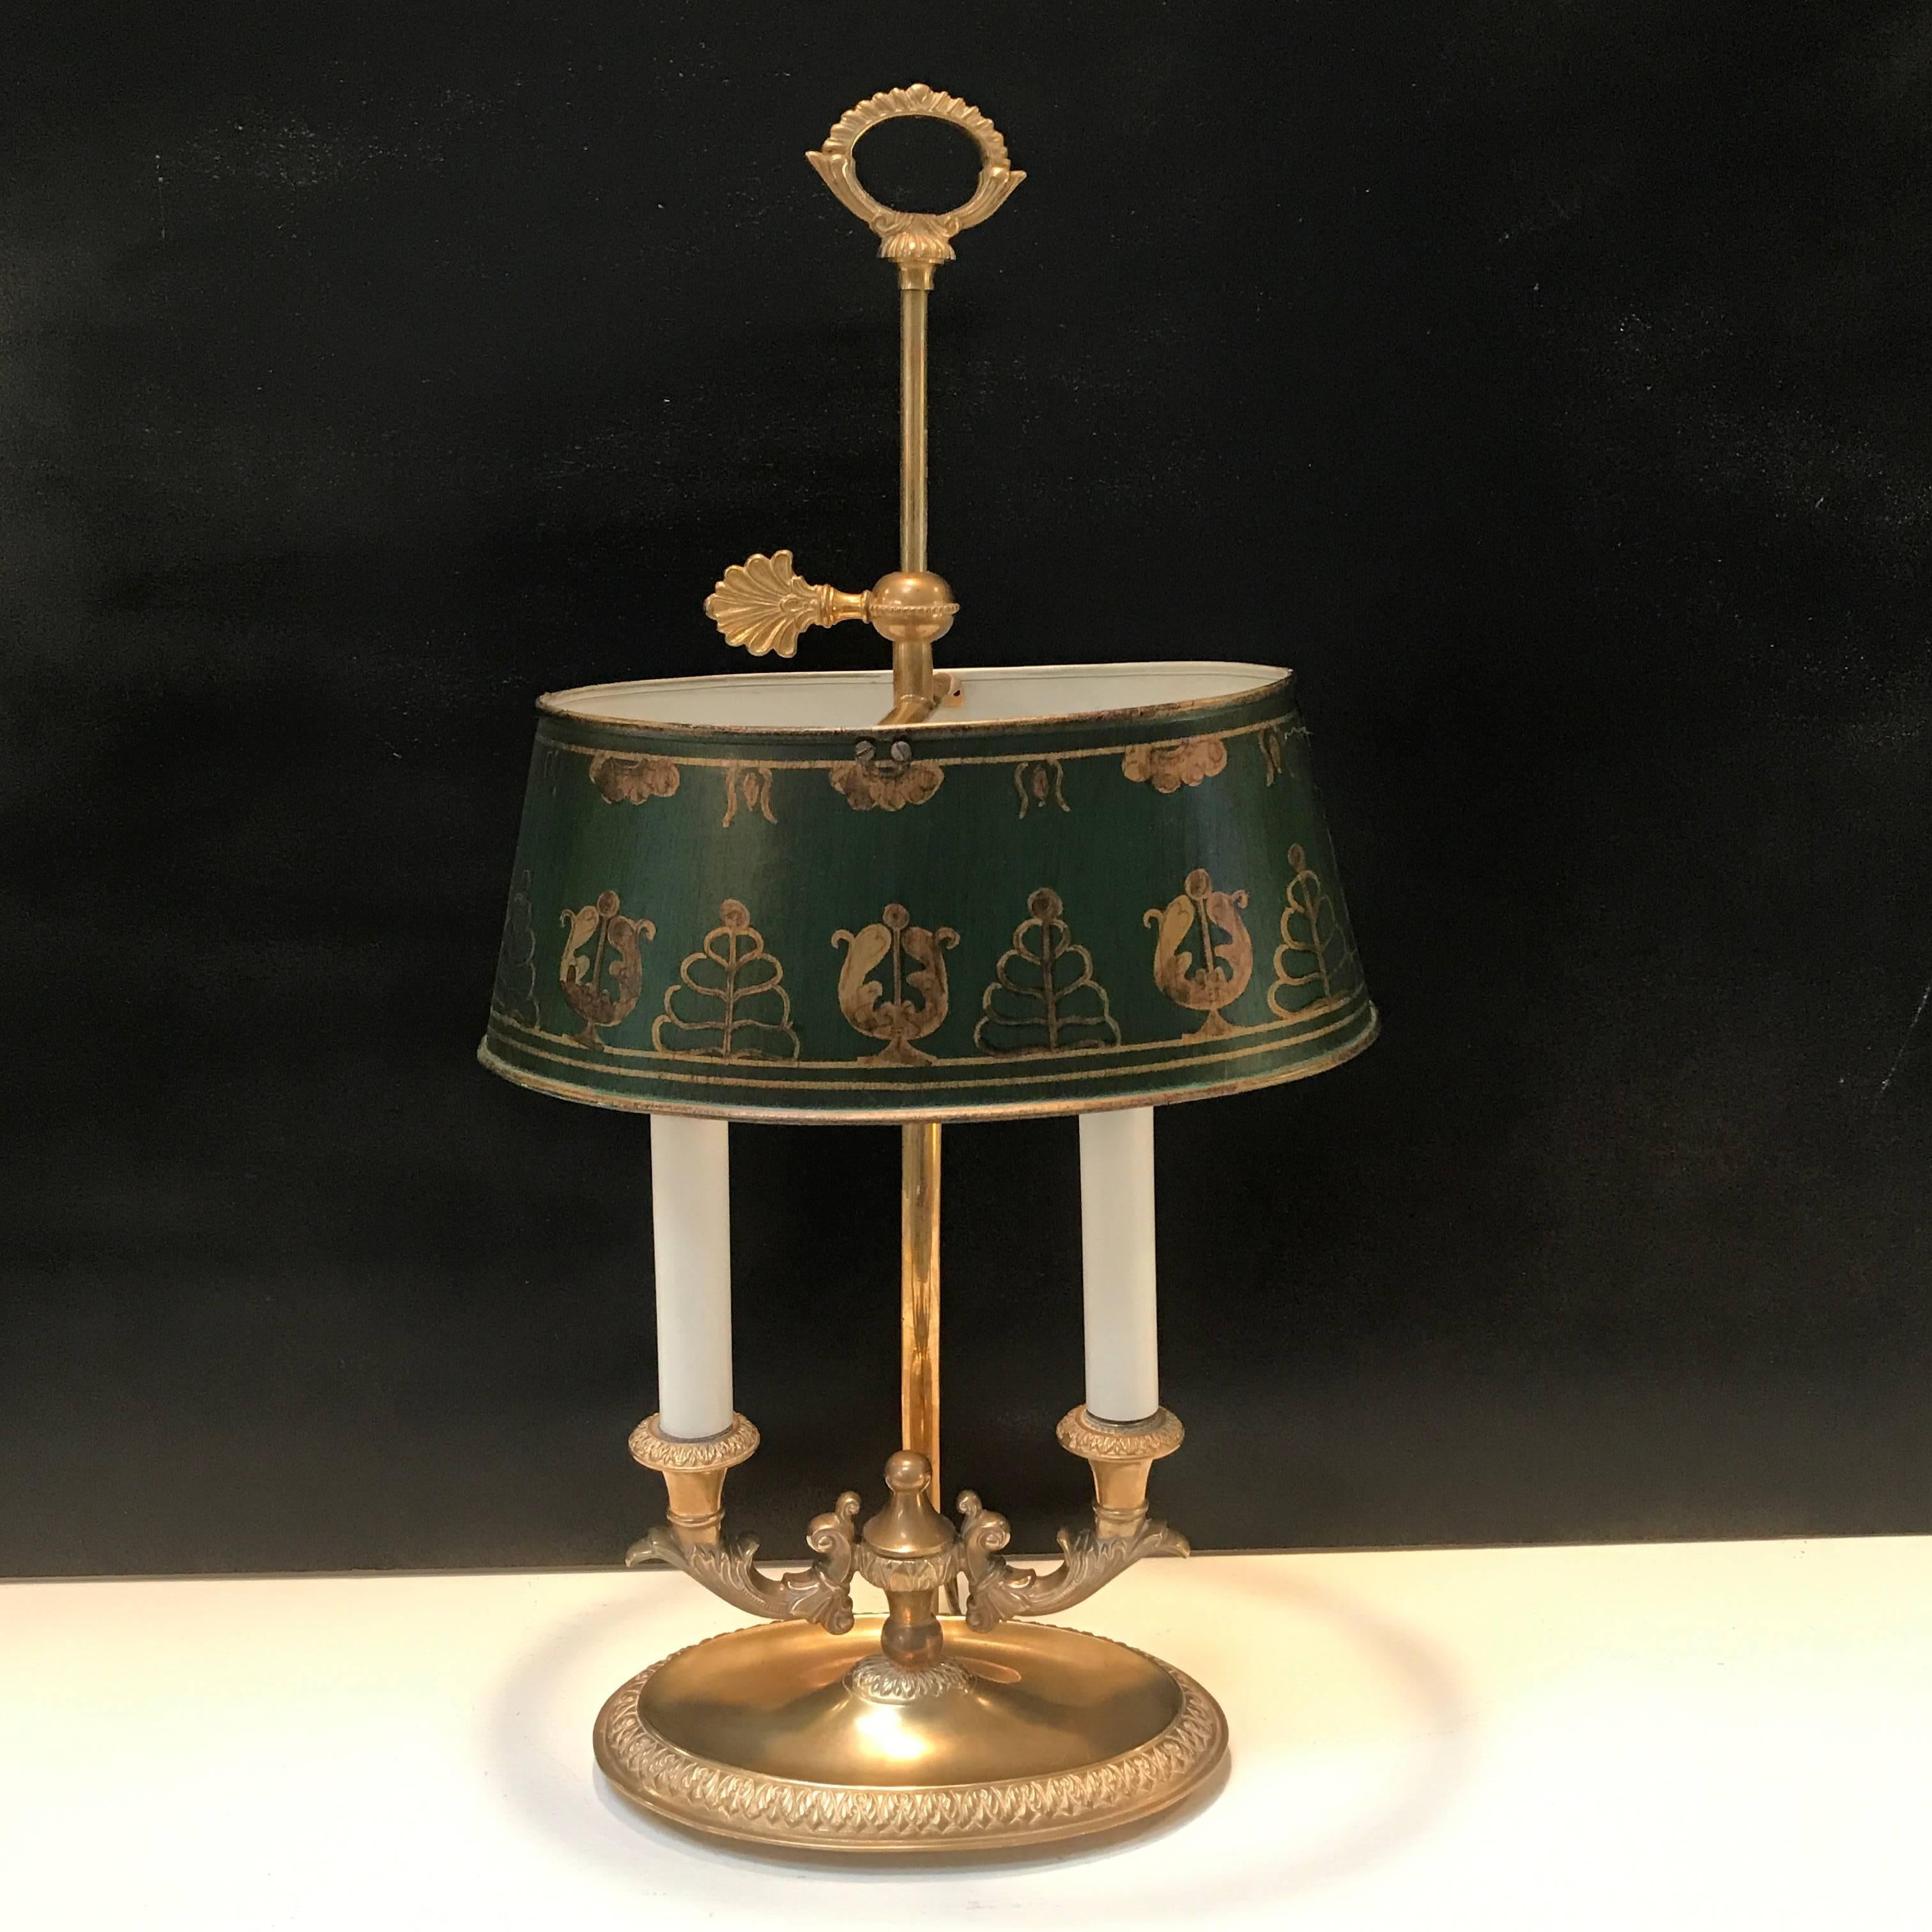 French gilt bronze Bouillotte lamp, with finely decorated oval shade, fitted with two candelabra bulbs, up to 60 watts each
The base measures 7.5